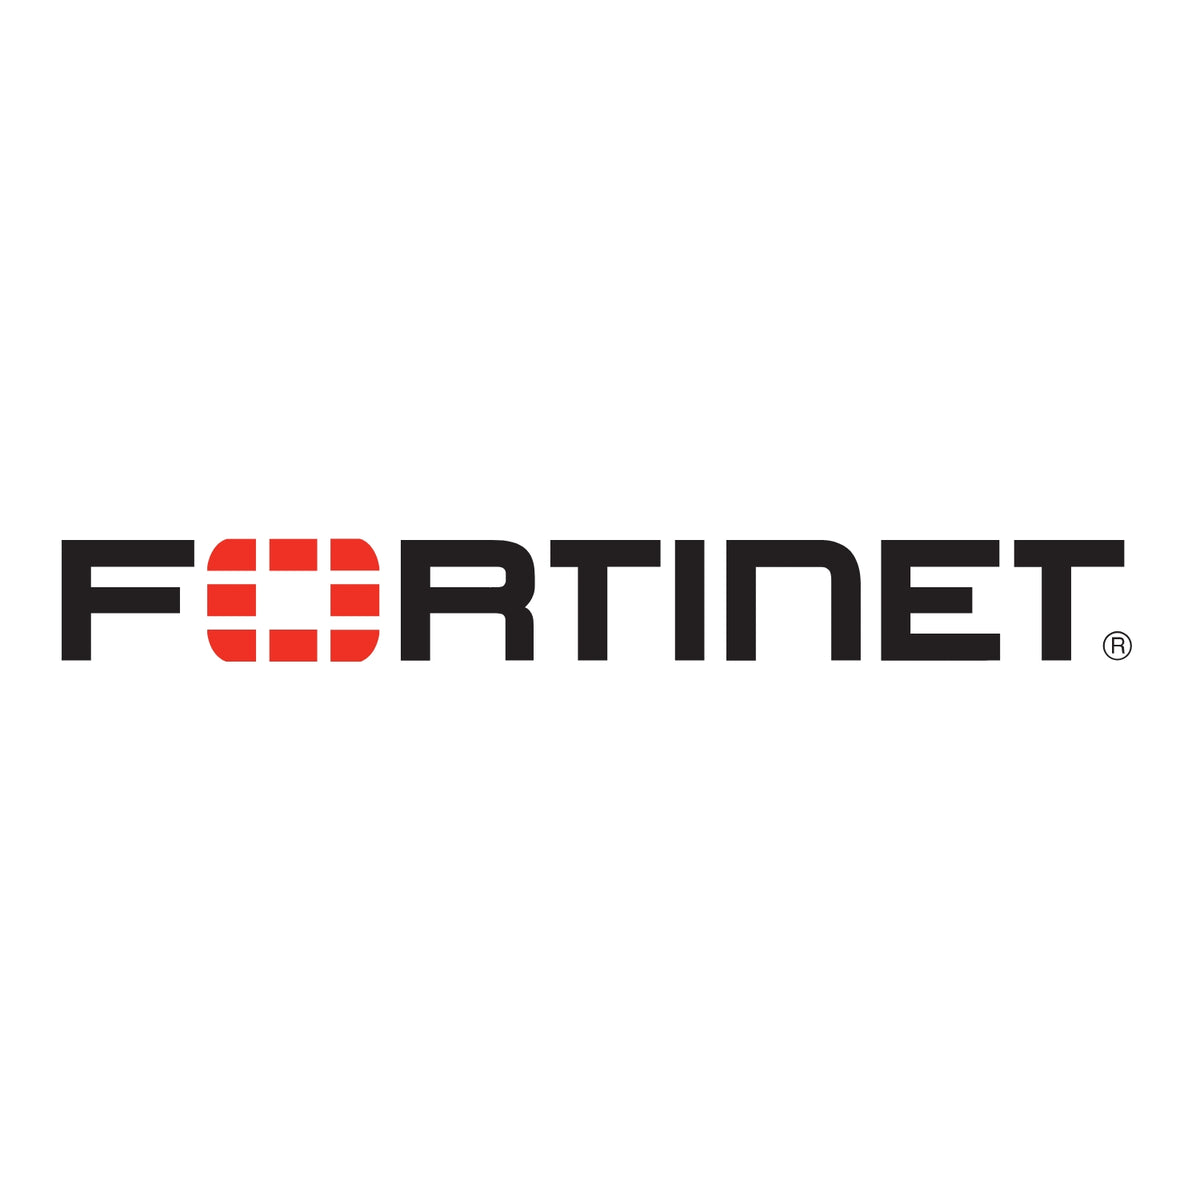 Fortinet - Leader of Cybersecurity Solutions